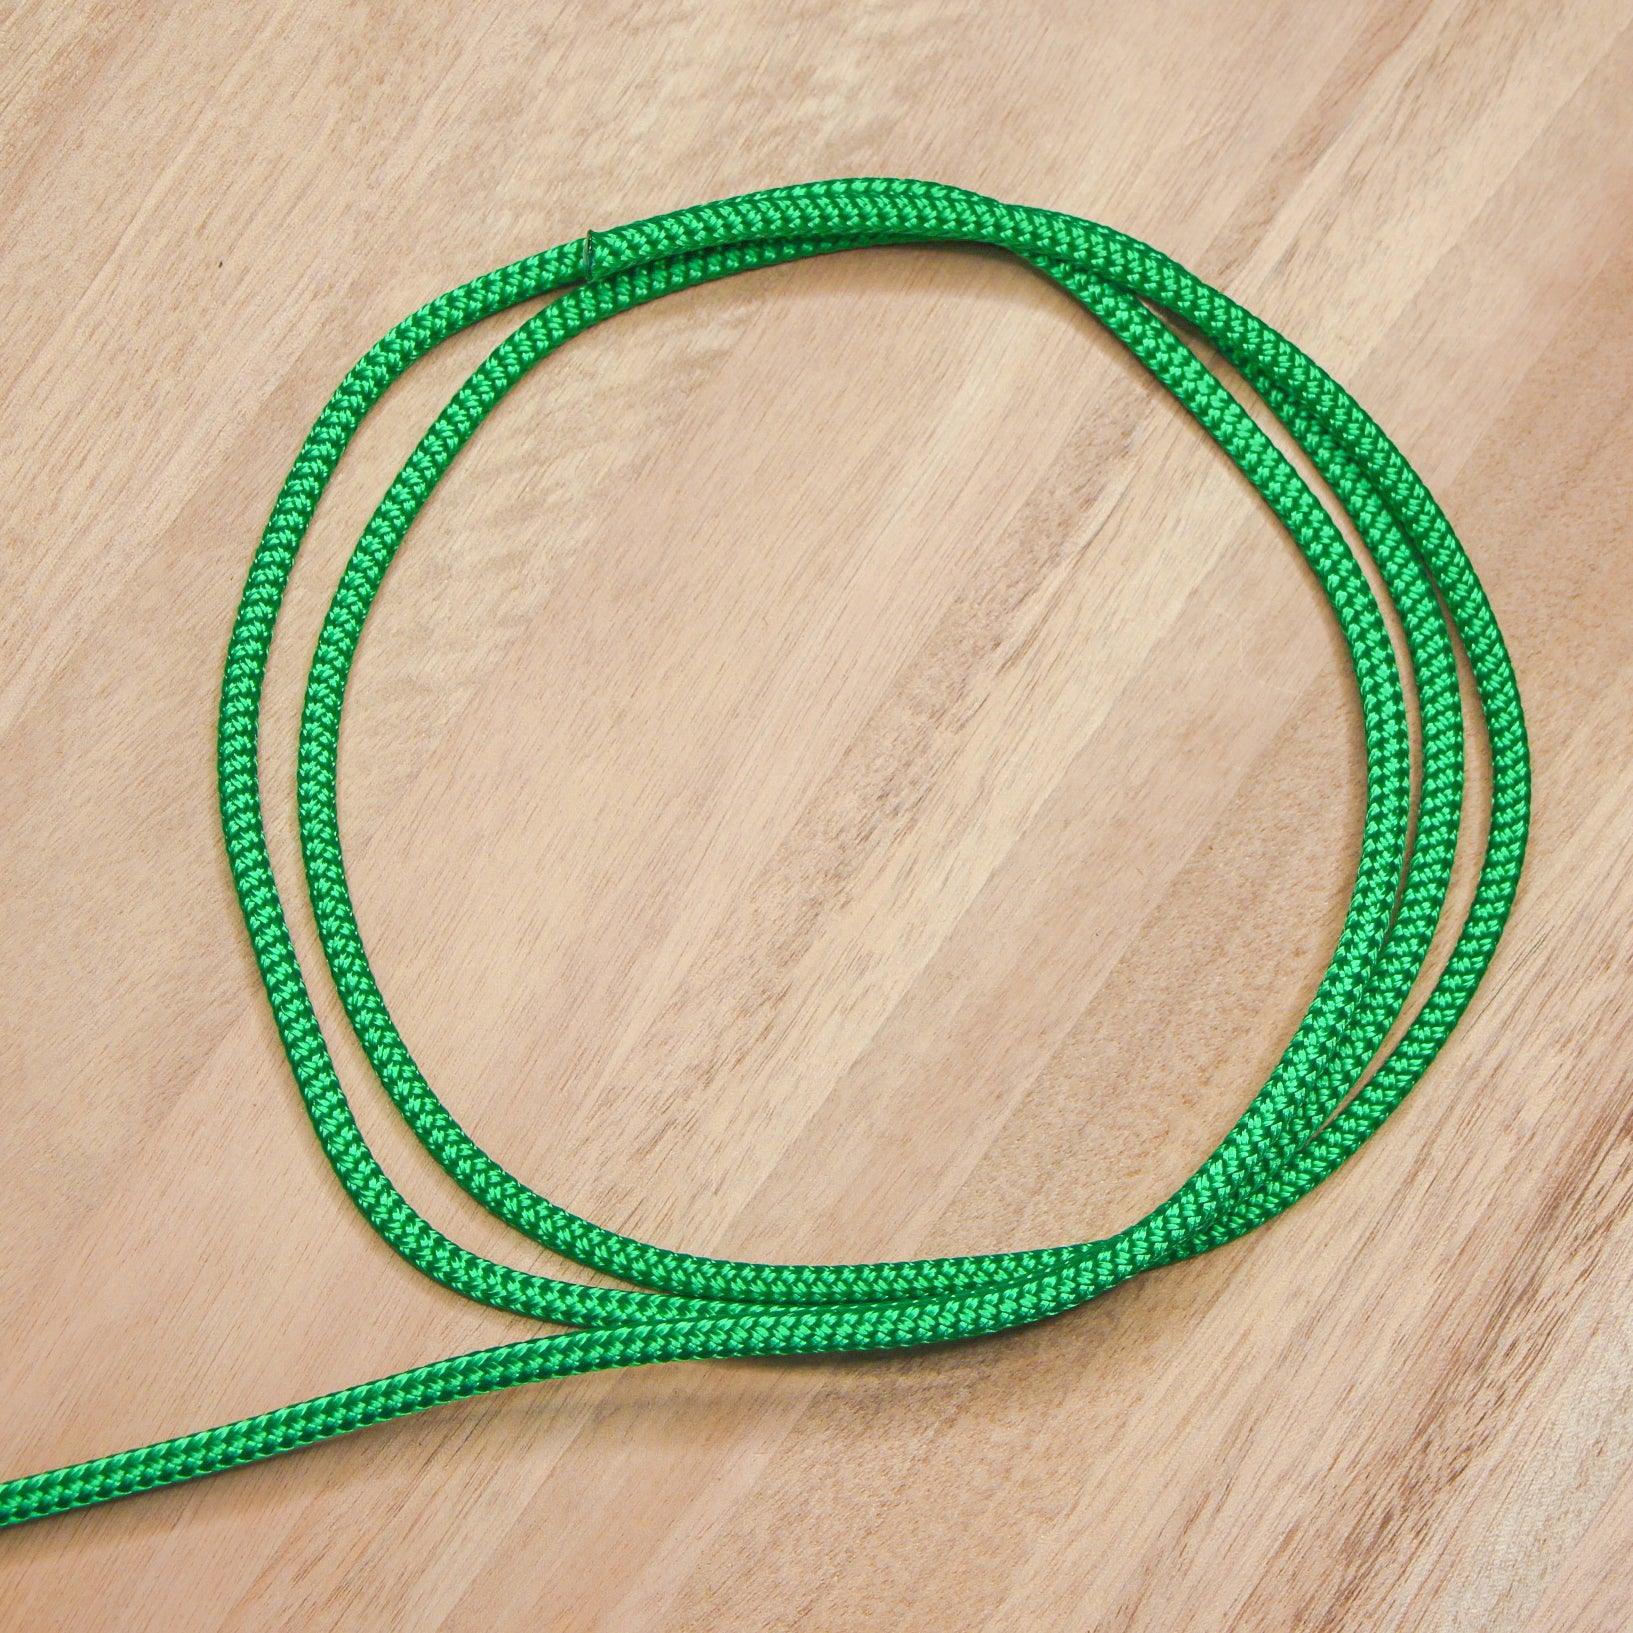 Marine Rope - Green - 6mm - Cams Cords